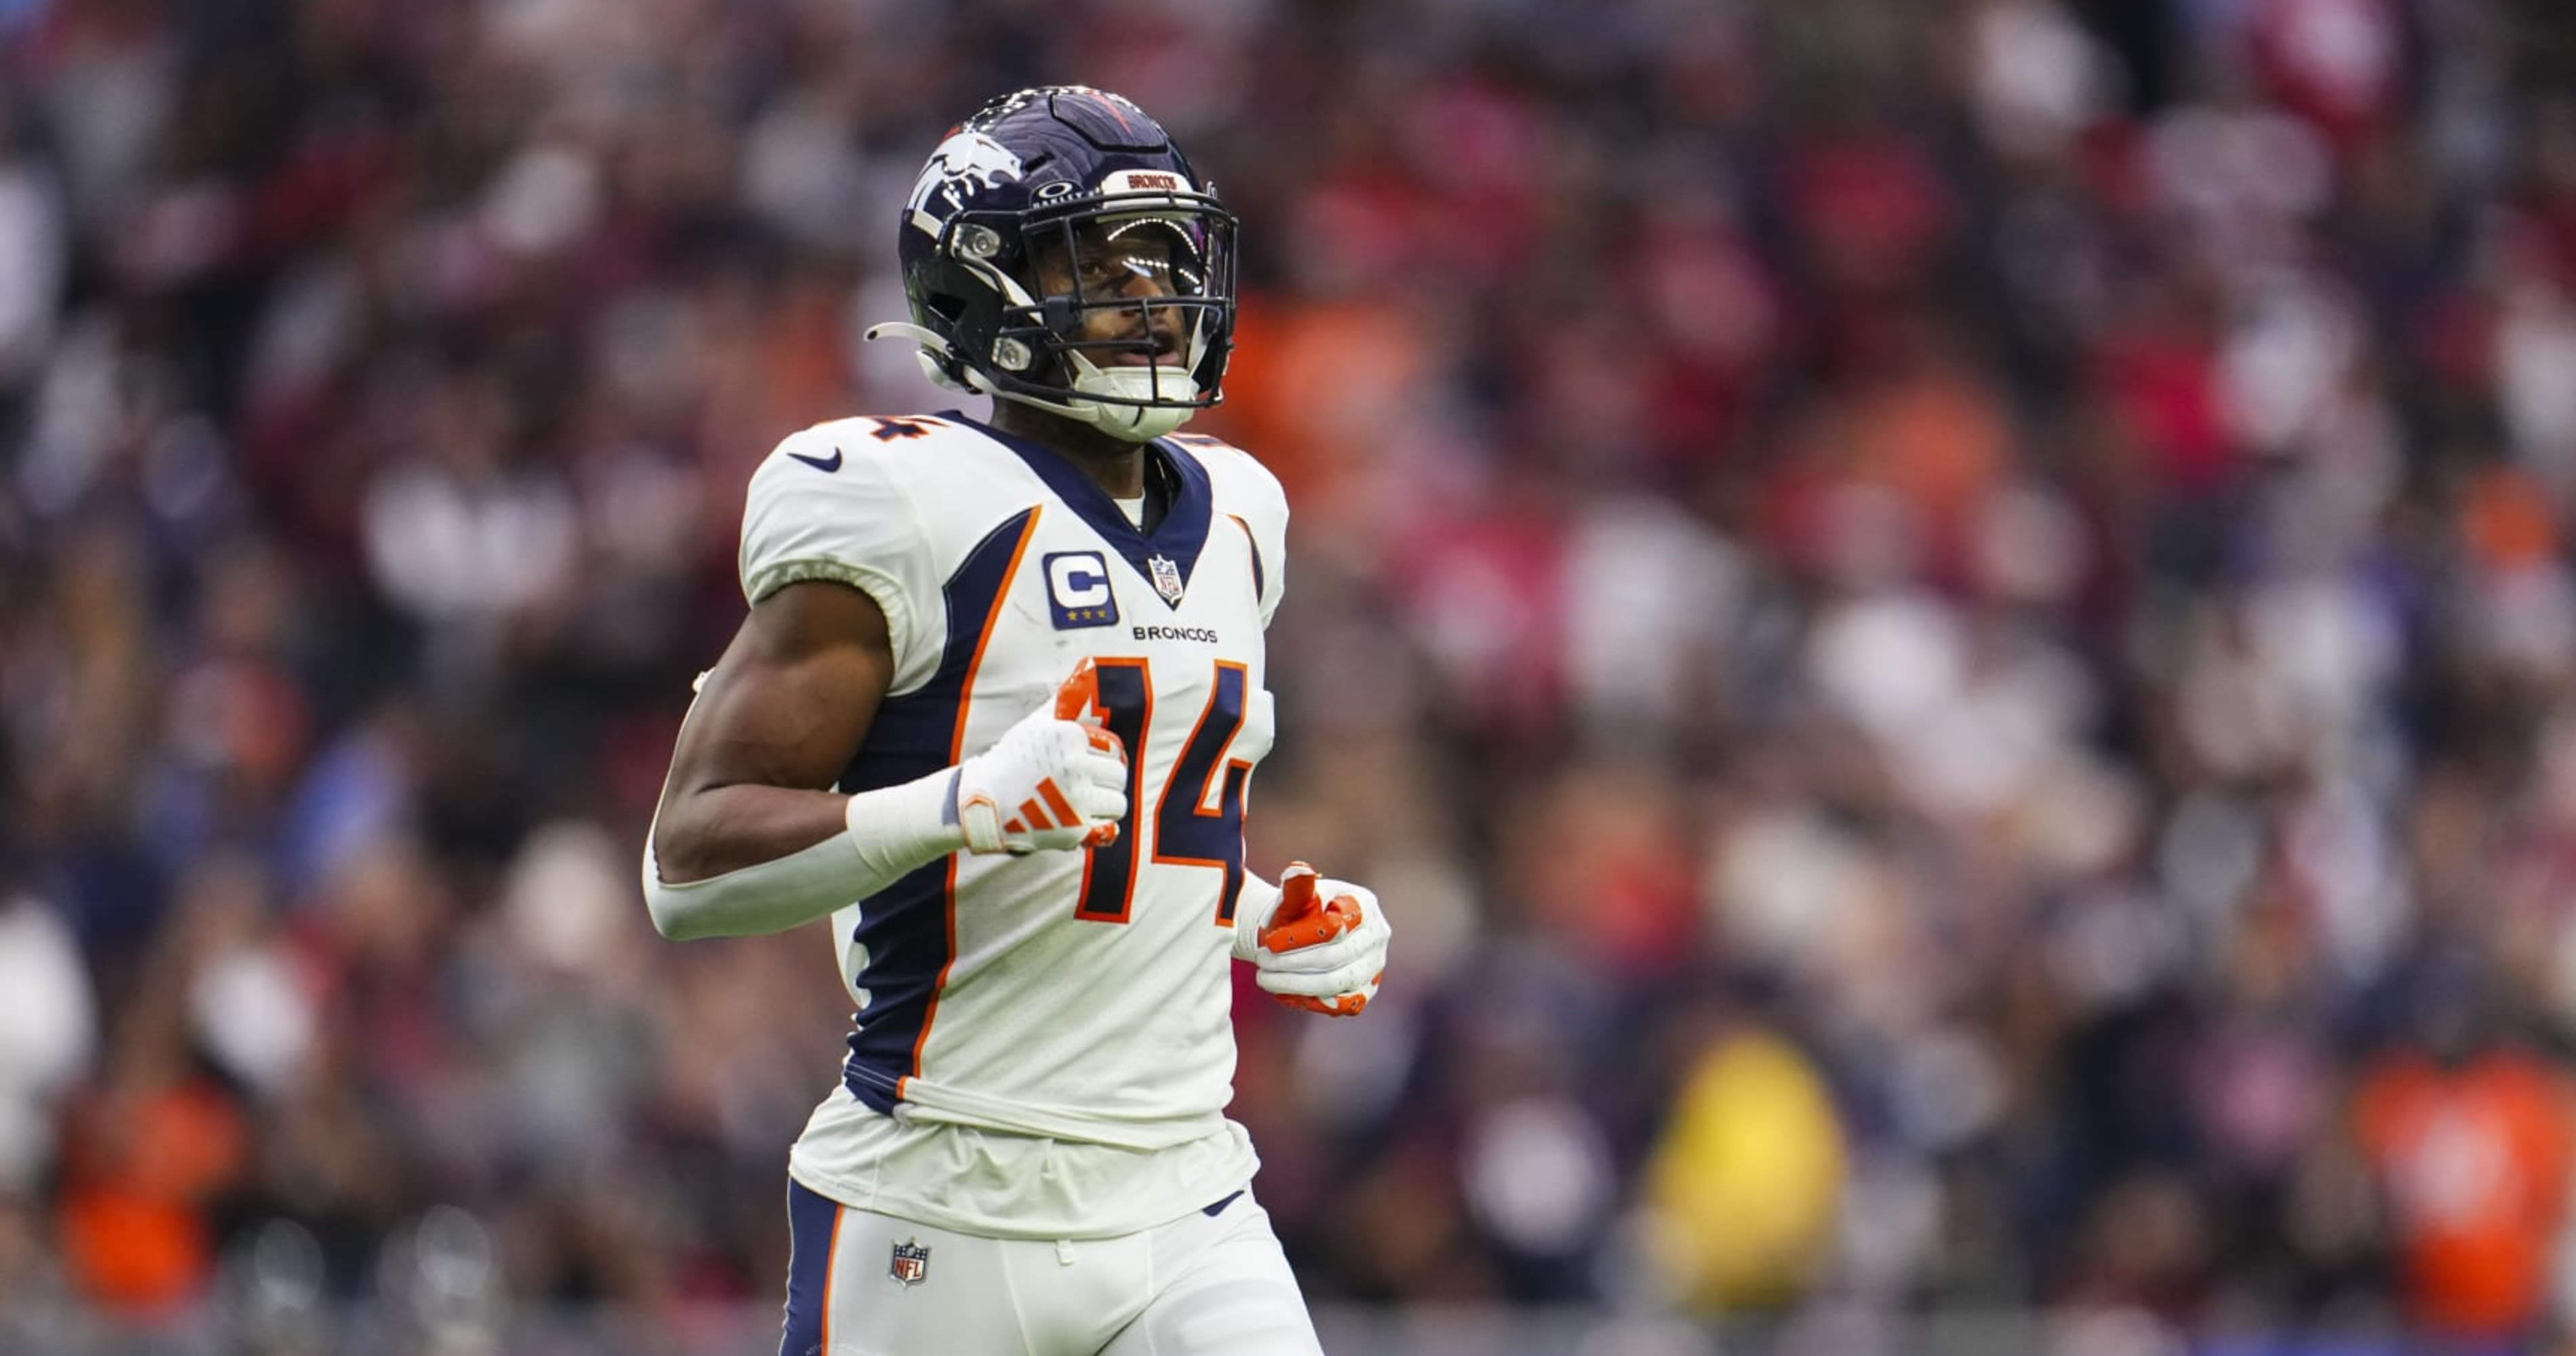 NFL Rumors: Courtland Sutton, Broncos Haven't Made 'Real Progress' on Contract Talks